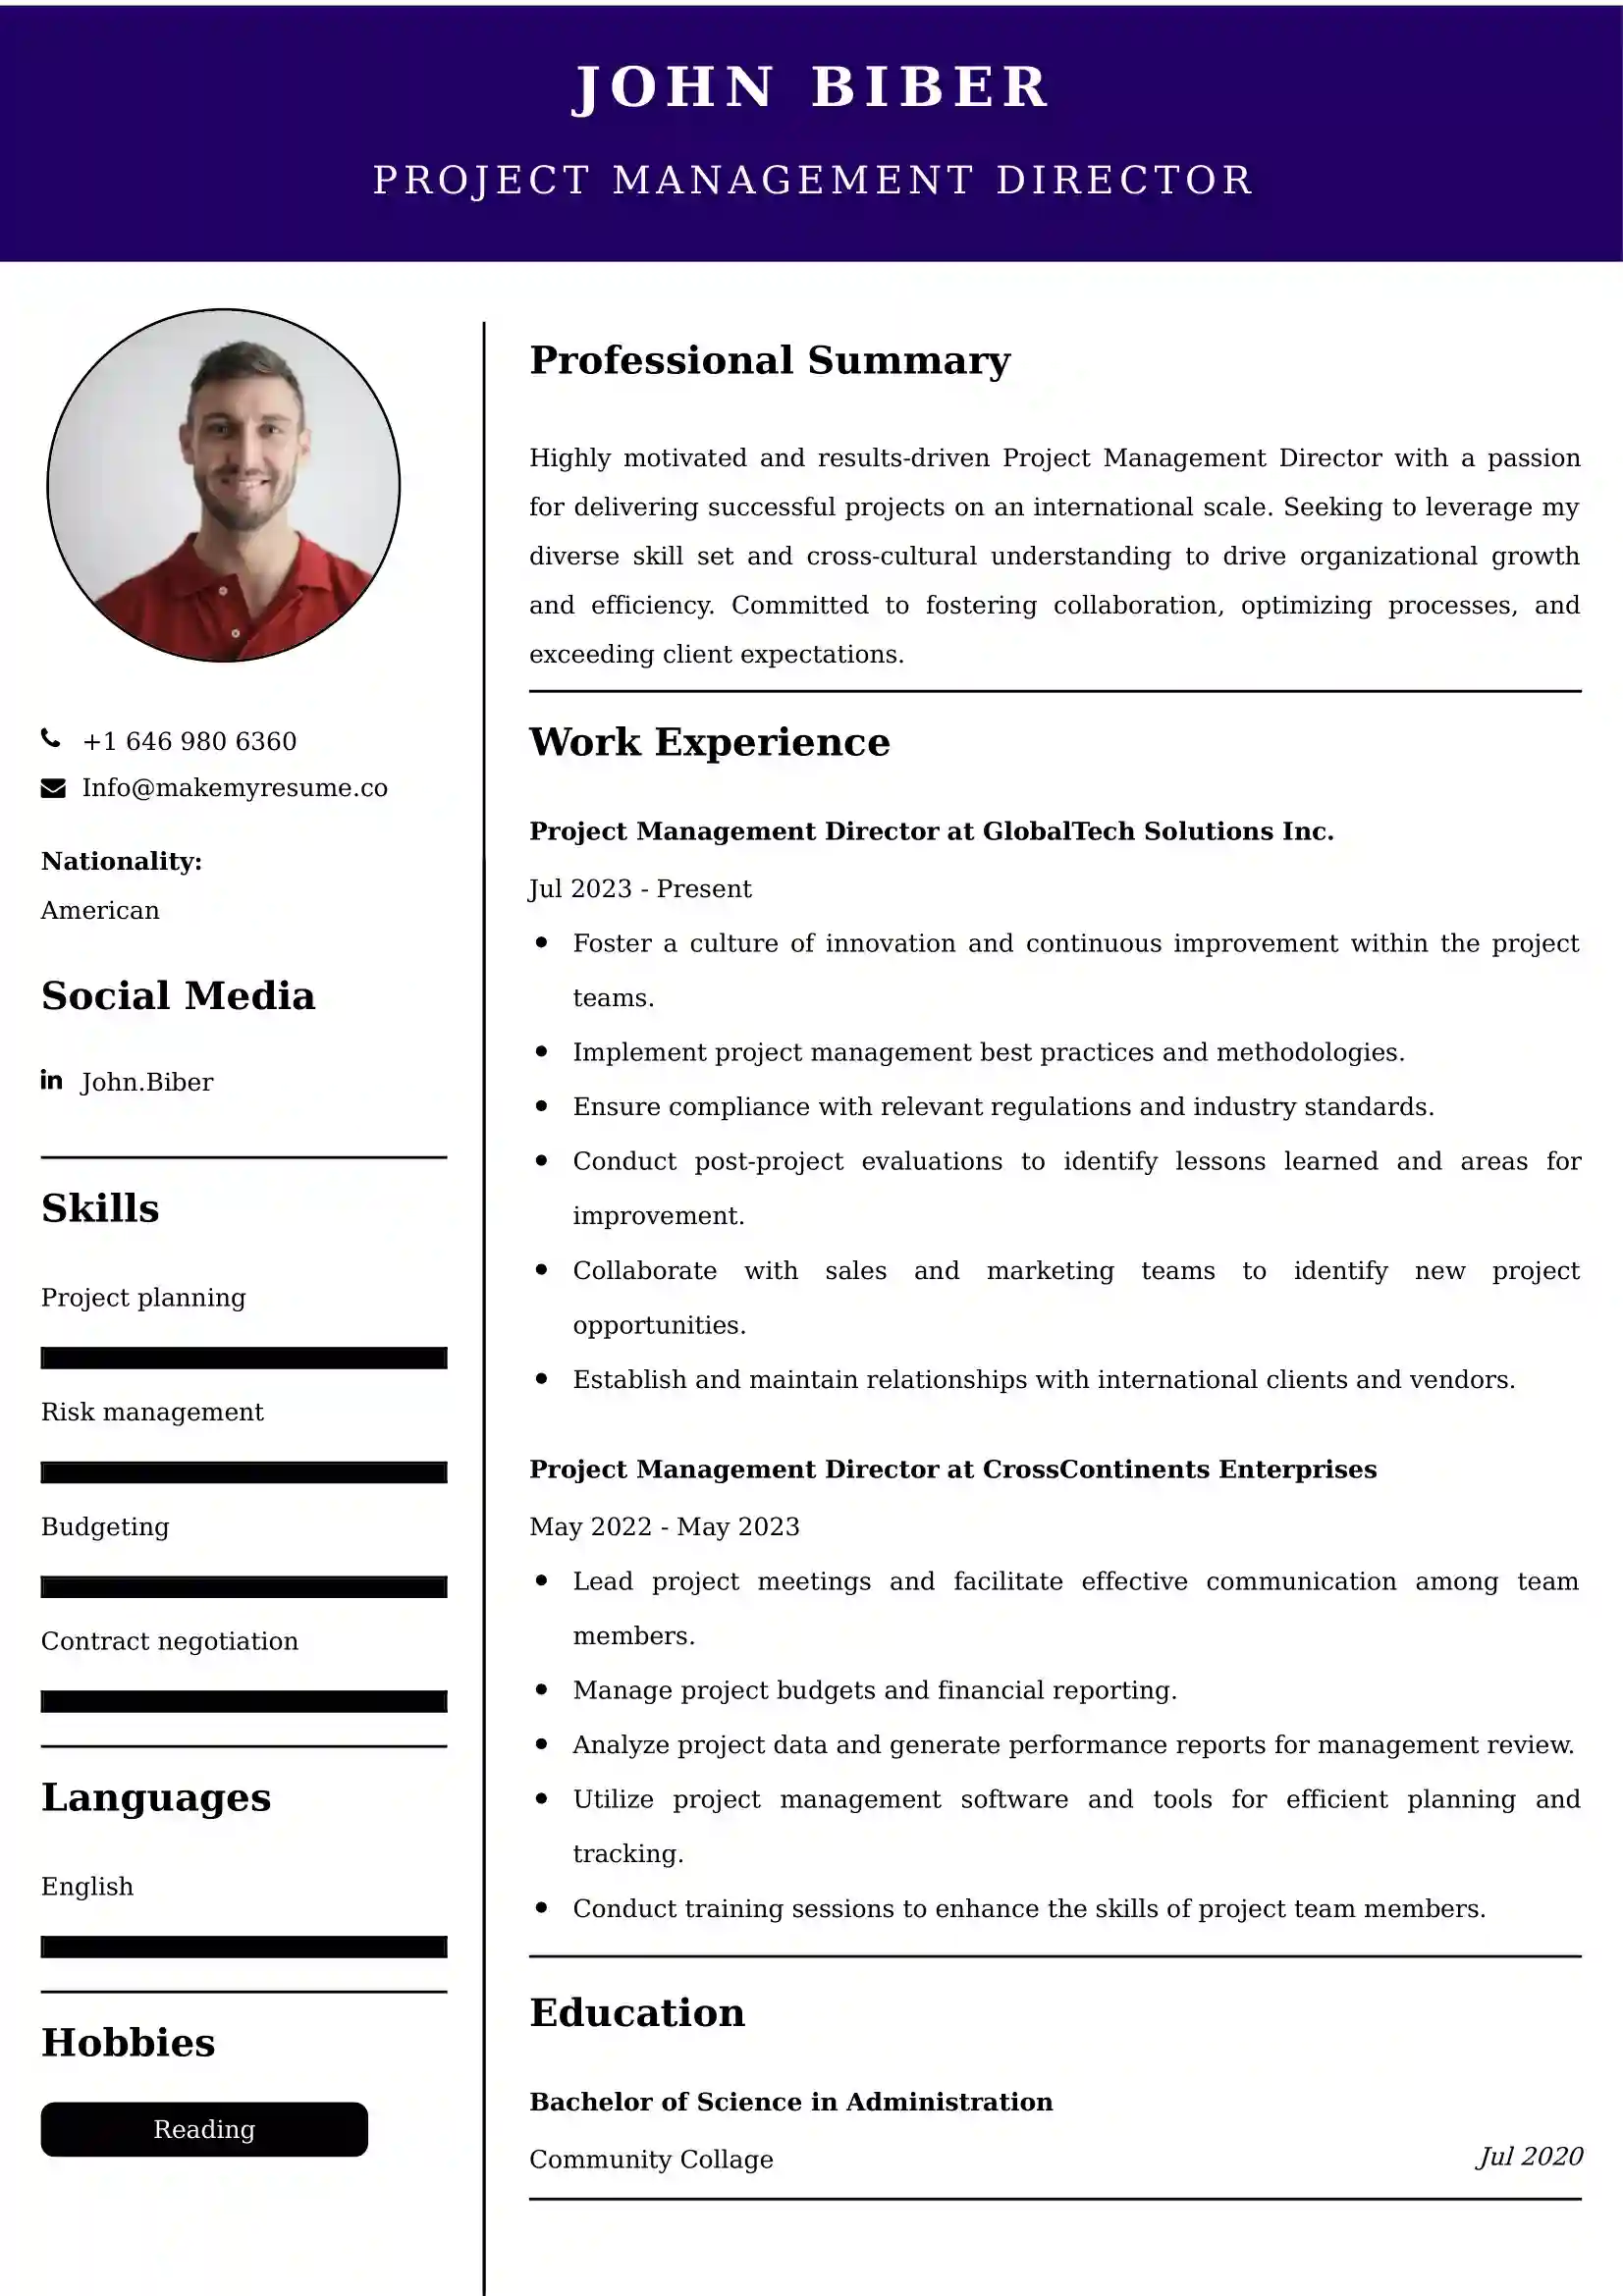 Project Management Director Resume Examples for UK Jobs - Tips and Guide